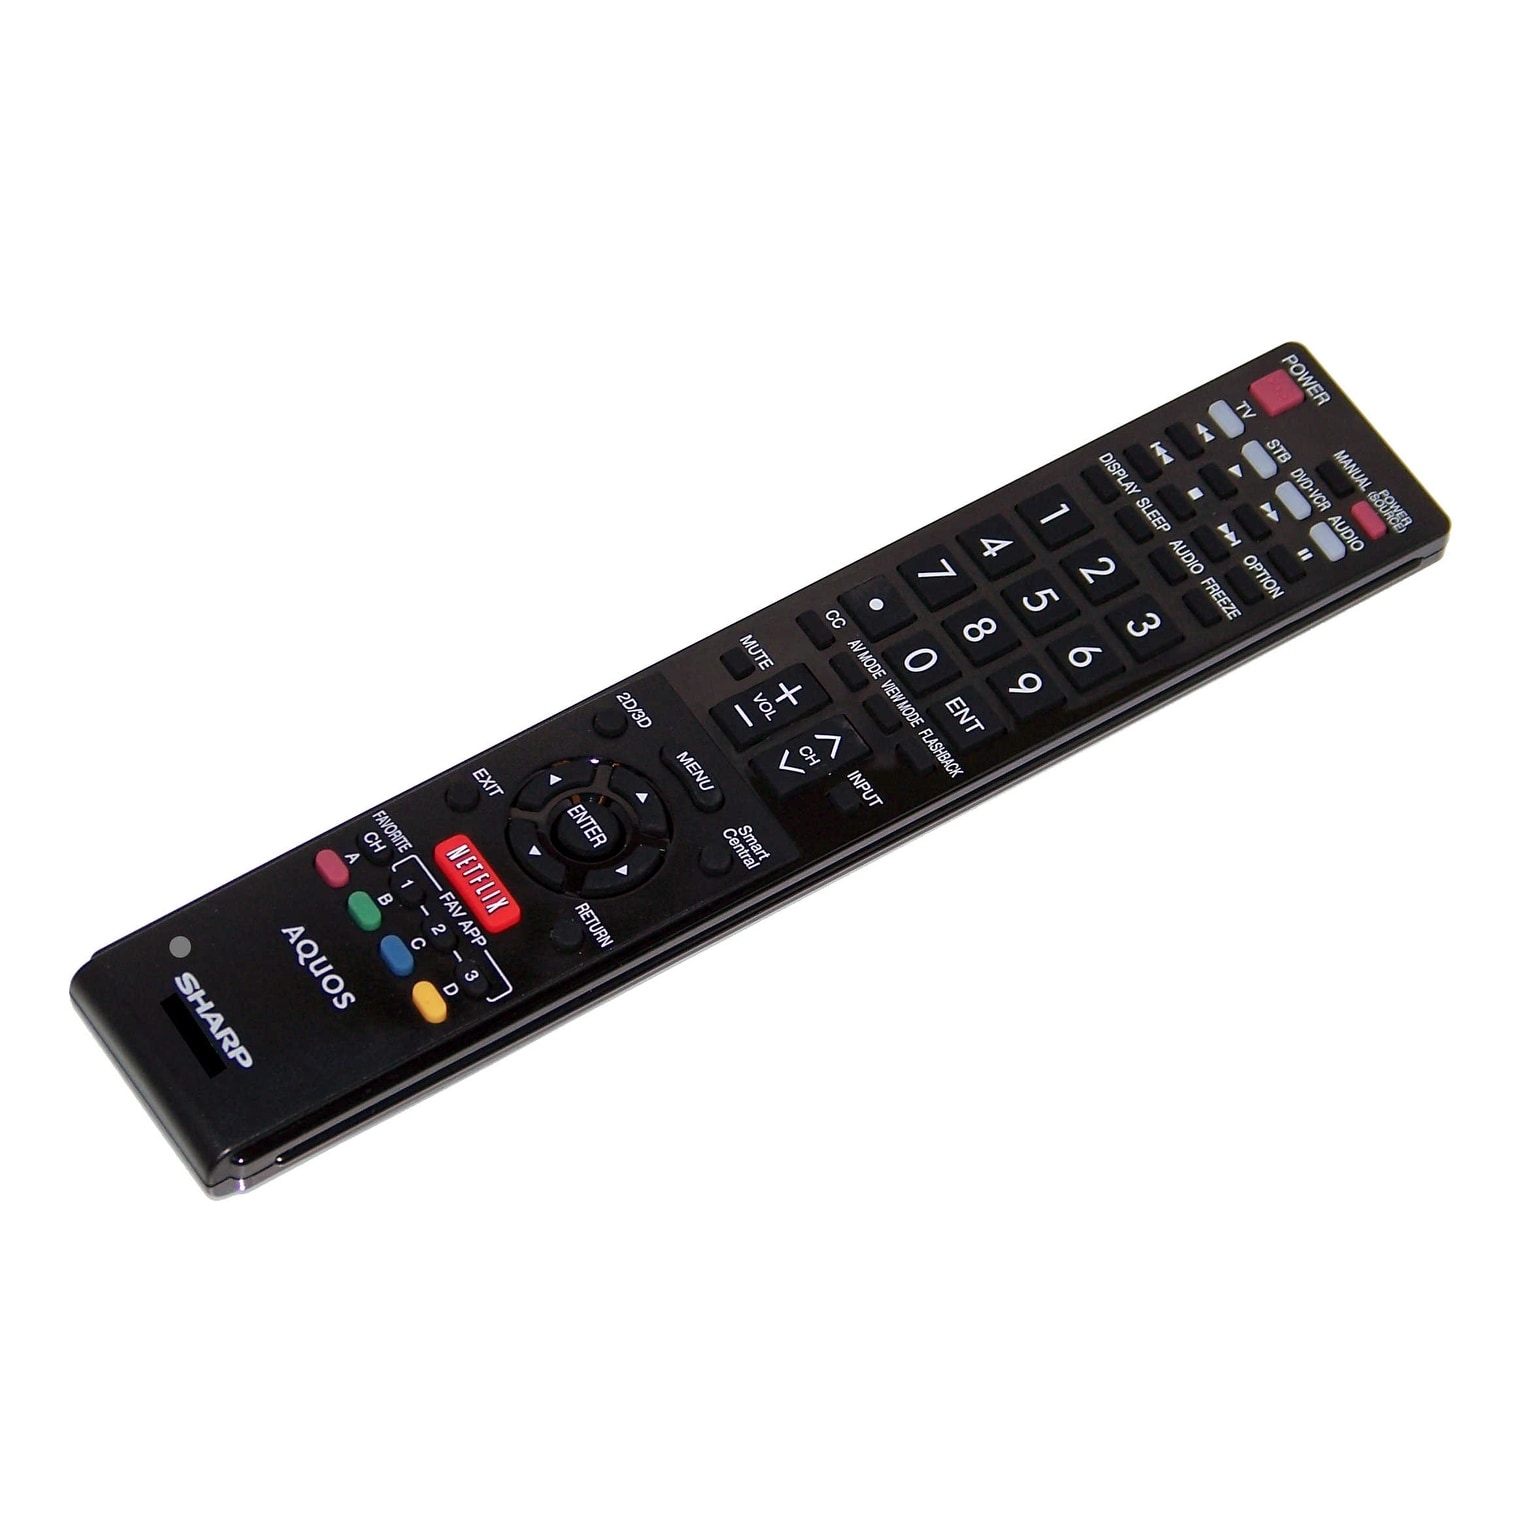 OEM Sharp Remote Control Specifically For: LC60LE830U, LC-60LE830U, LC60LE831U, LC-60LE831U, LC60LE832U, LC-60LE832U